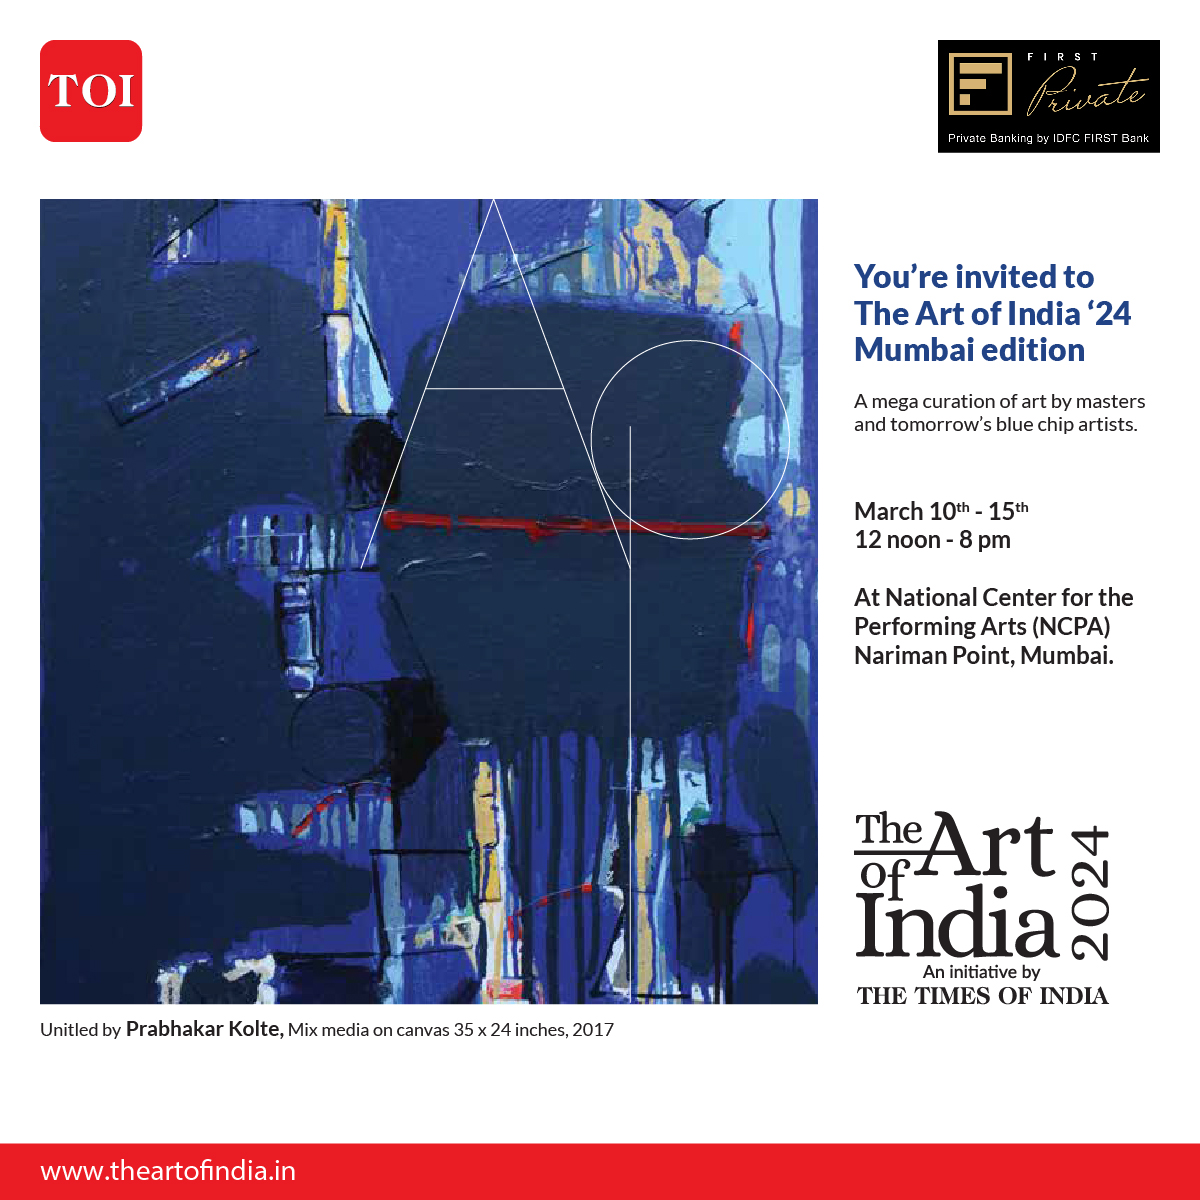 Step into a world of artistic wonder with our featured artists! 

Come witness, from March 10th-15th, 12 noon - 8 pm, at the National Center for the Performing Arts (NCPA), Nariman Point, Mumbai.

#IDFCFIRSTBank #AlwaysYouFirst #IDFCFIRSTPrivate #TheArtOfIndia2024 #TheArtOfIndia